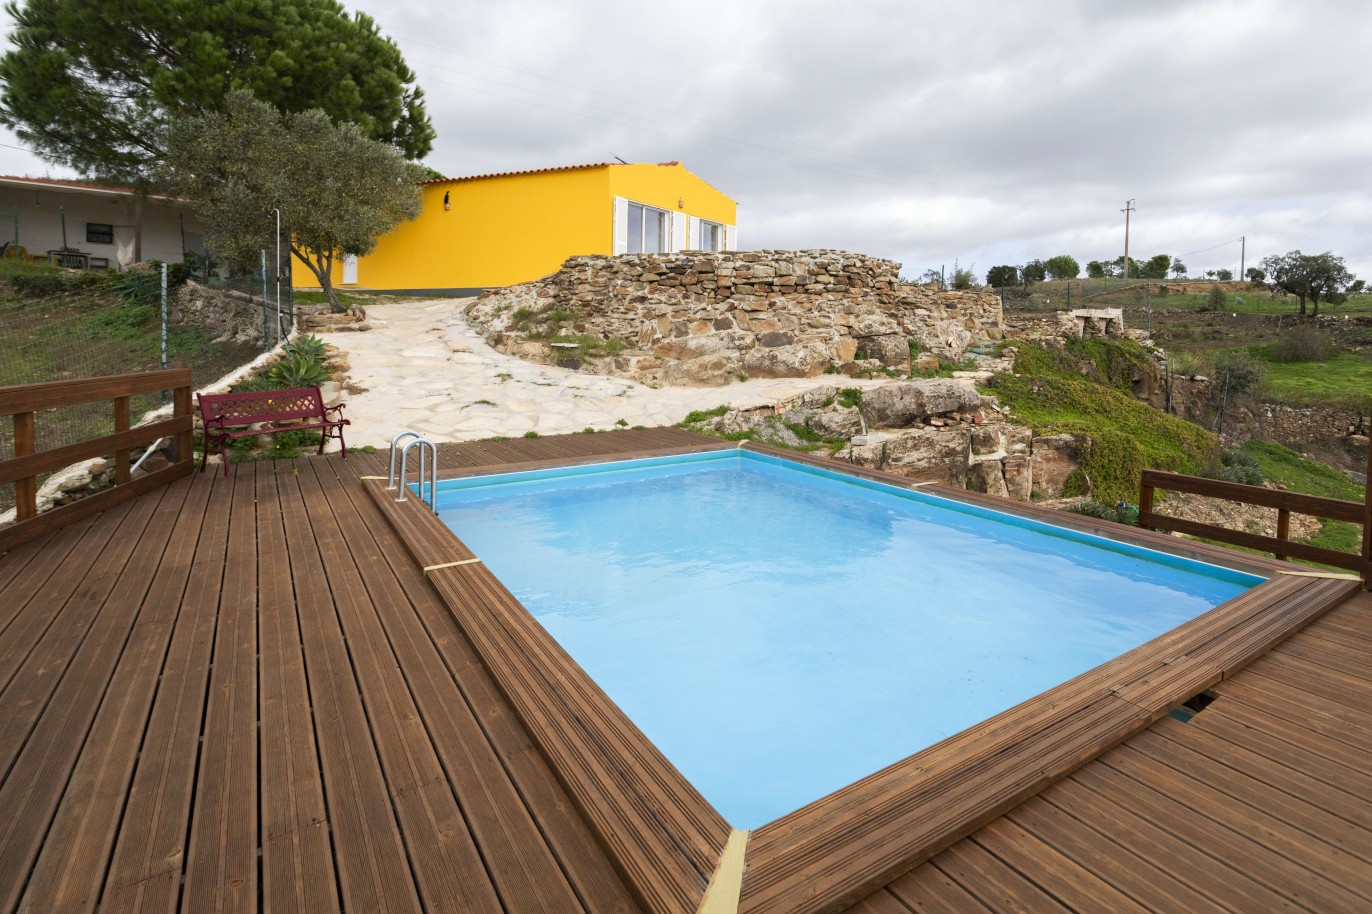 2 bedroom country house with pool, for sale in Tavira, Algarve_243295